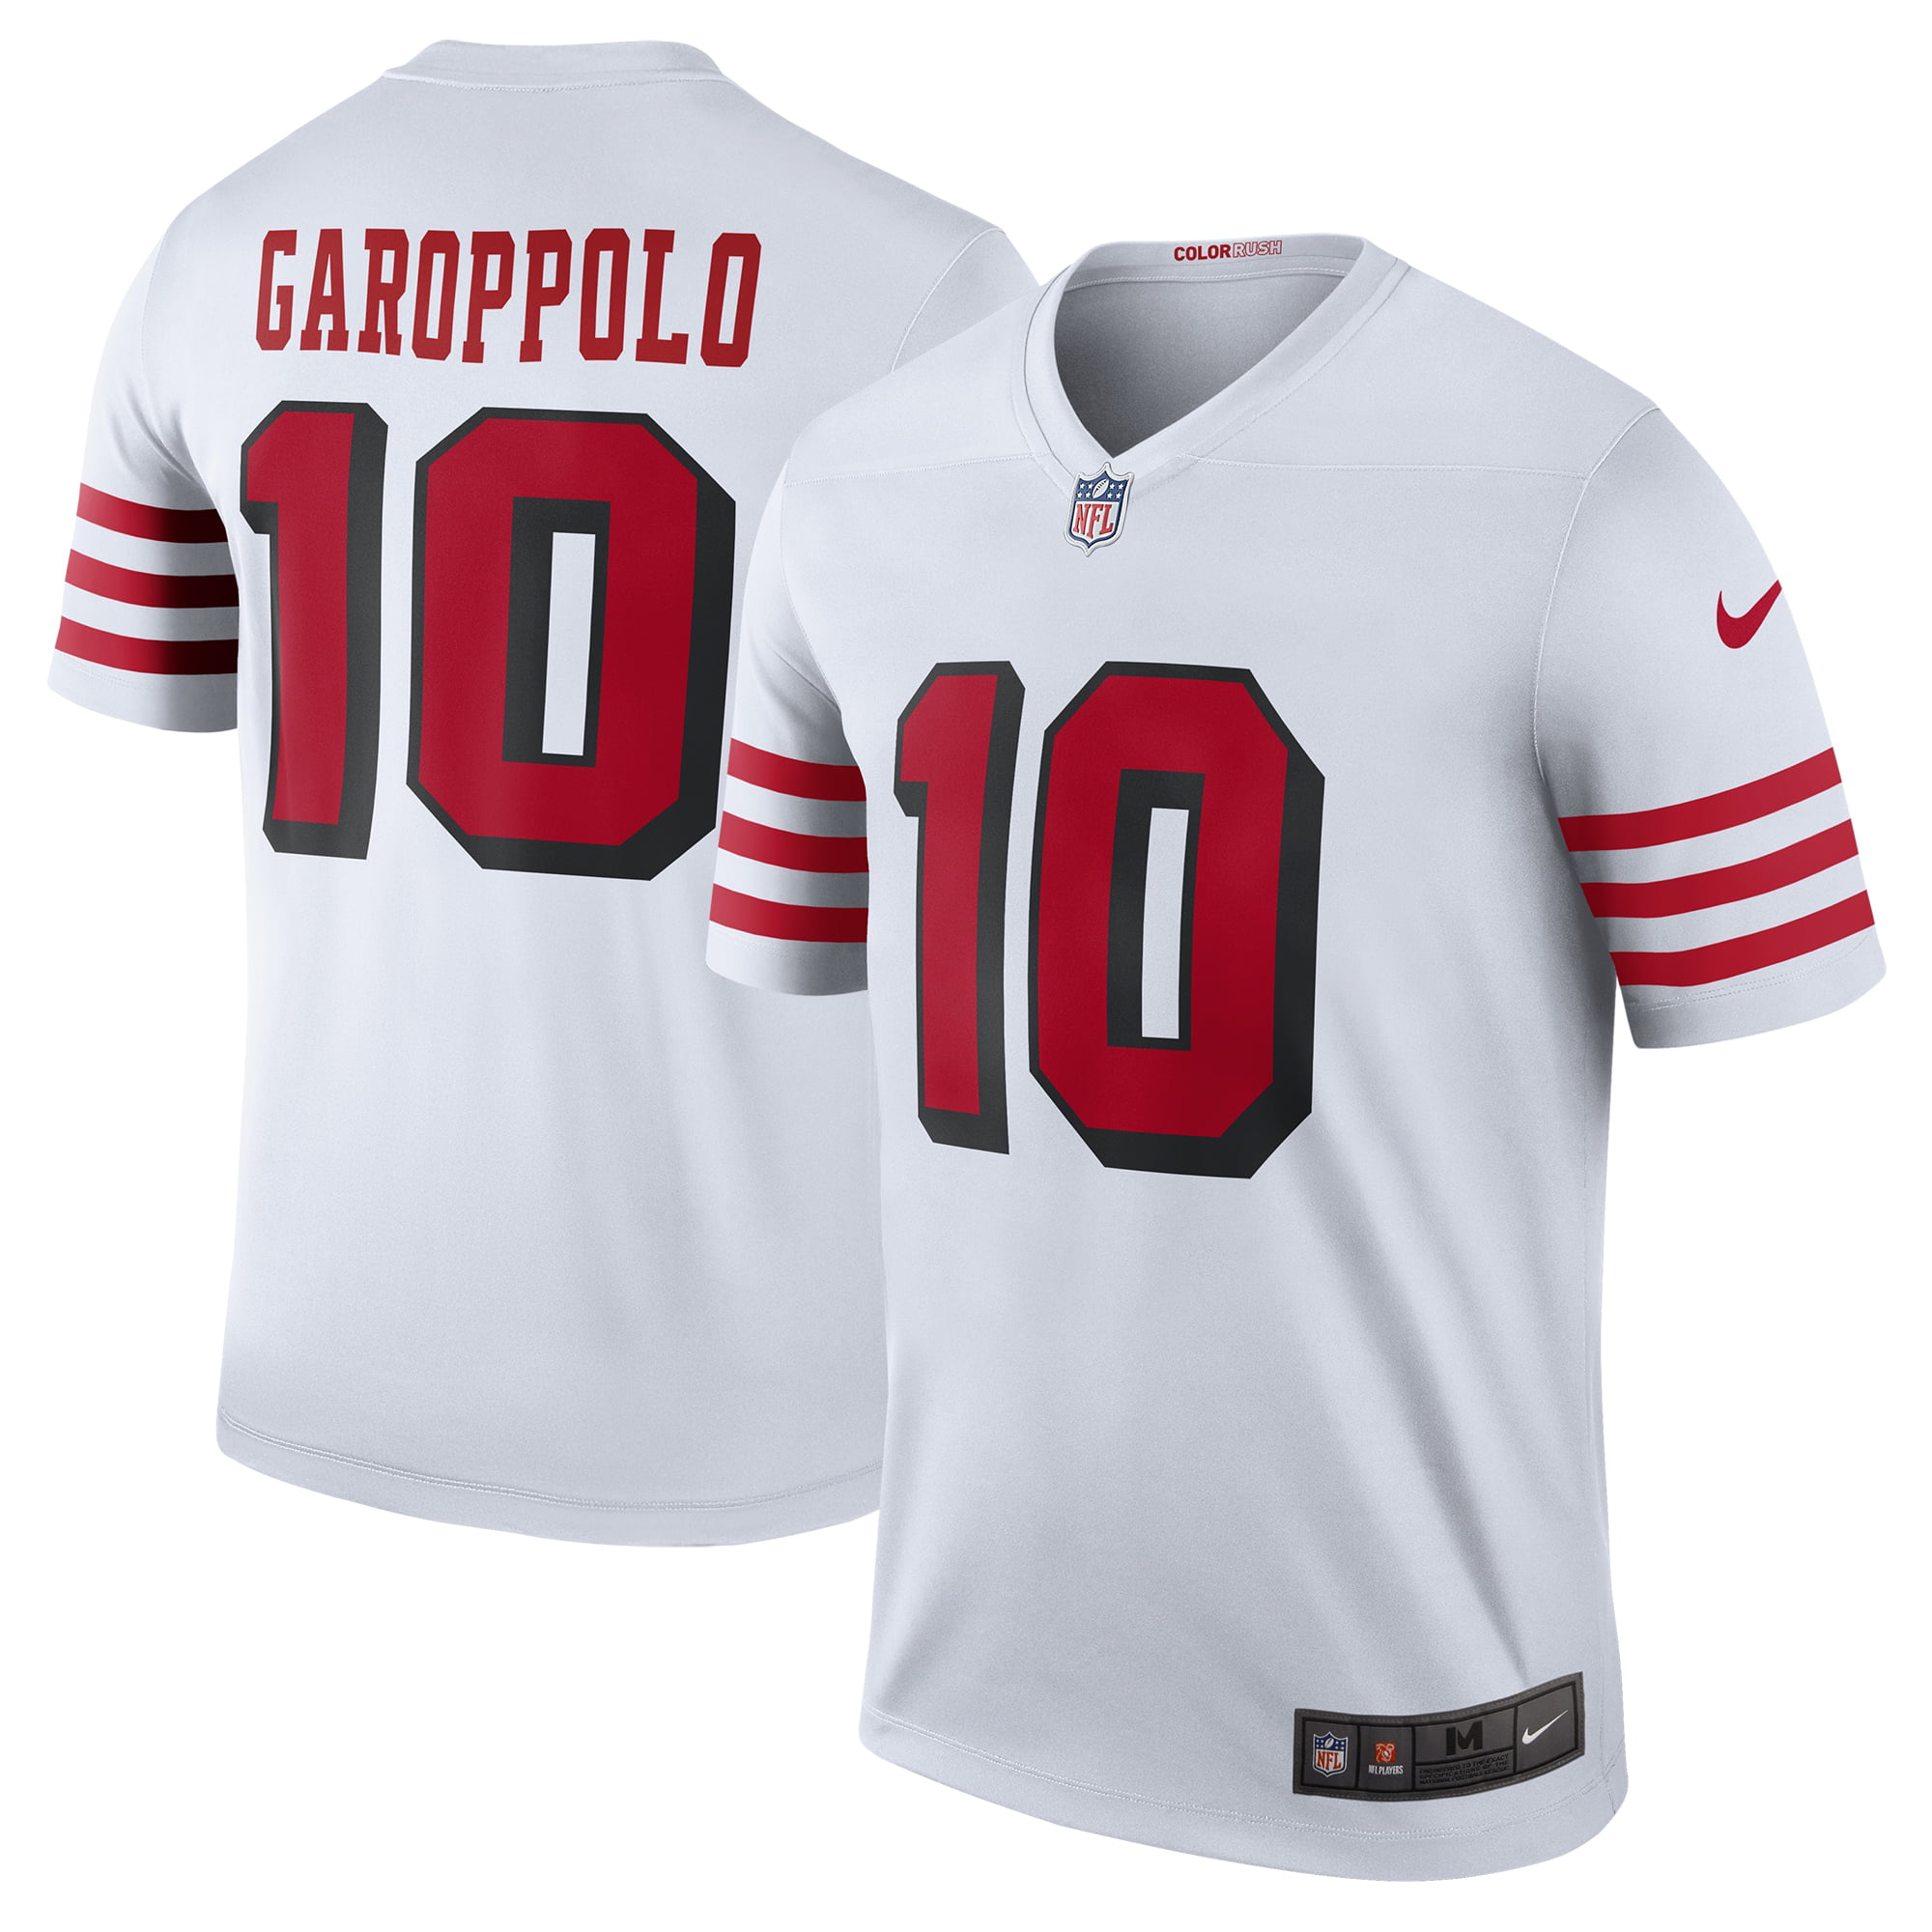 49ers jersey in store